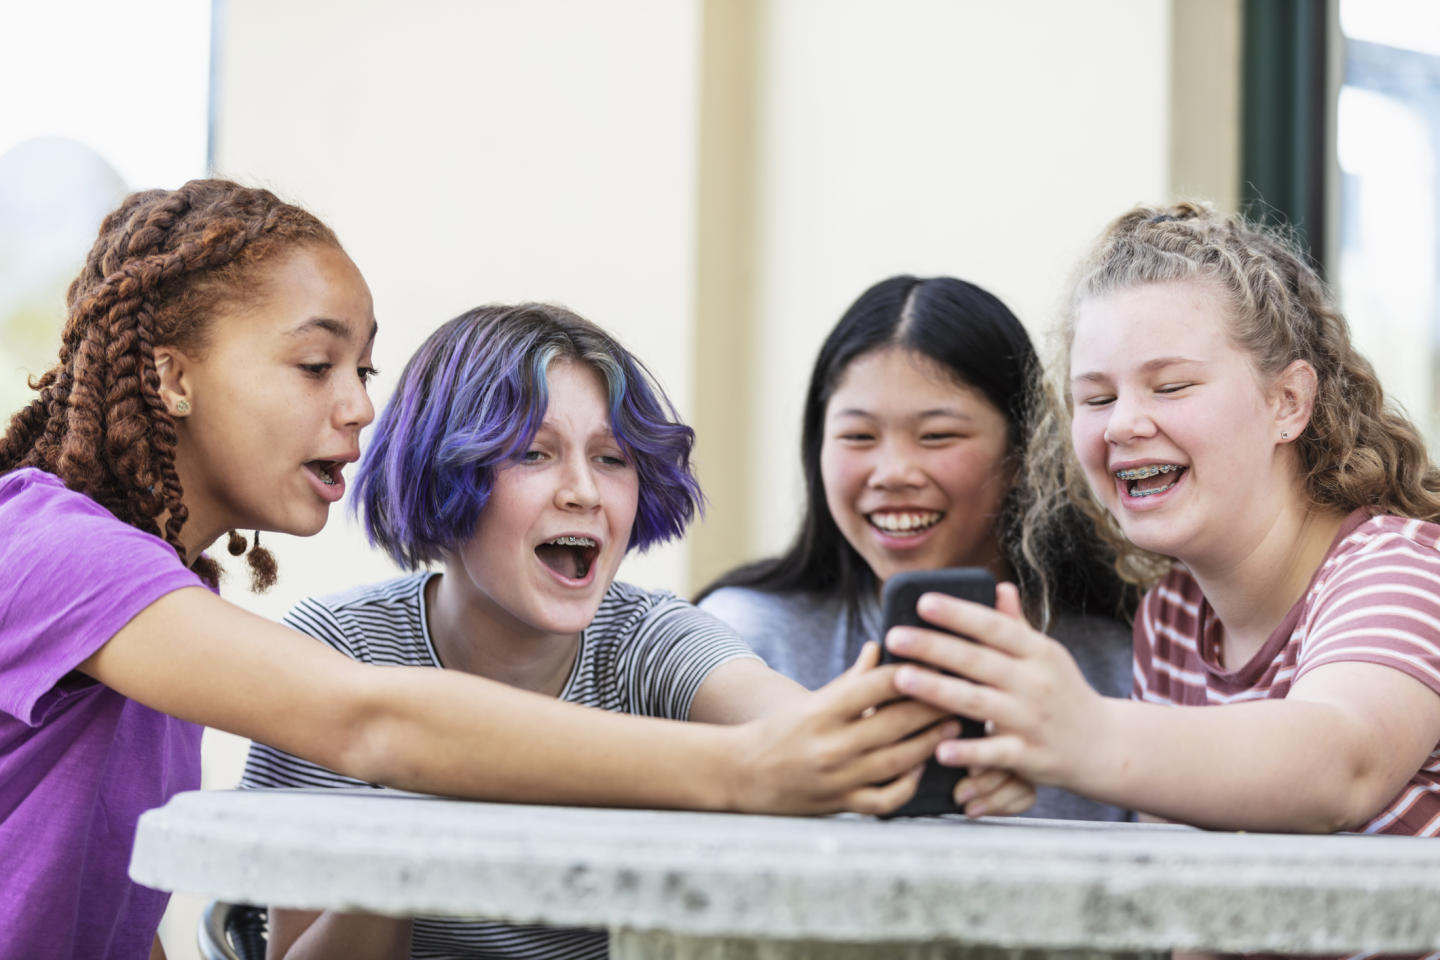 Four teenagers looking at smartphone laughing.